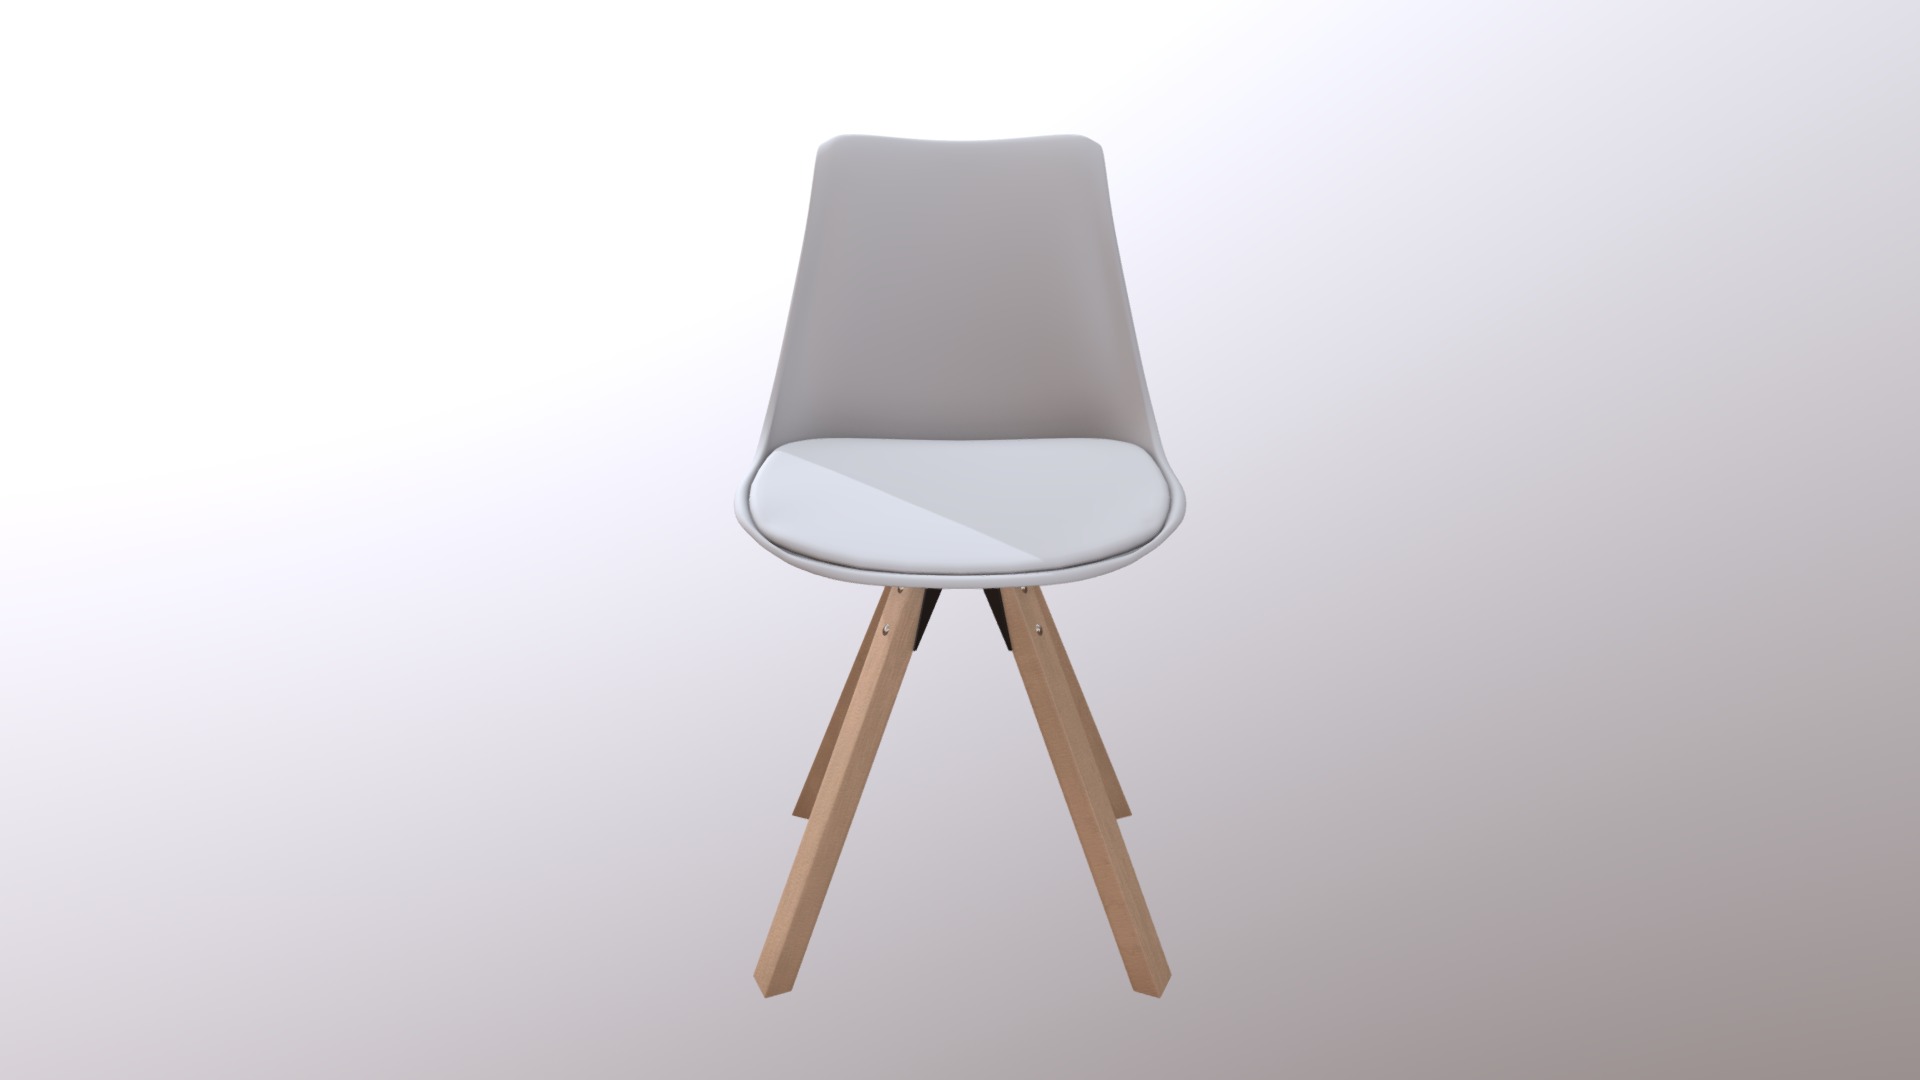 3D model Fashionable Kitchen Chair - This is a 3D model of the Fashionable Kitchen Chair. The 3D model is about a white chair with a wooden frame.